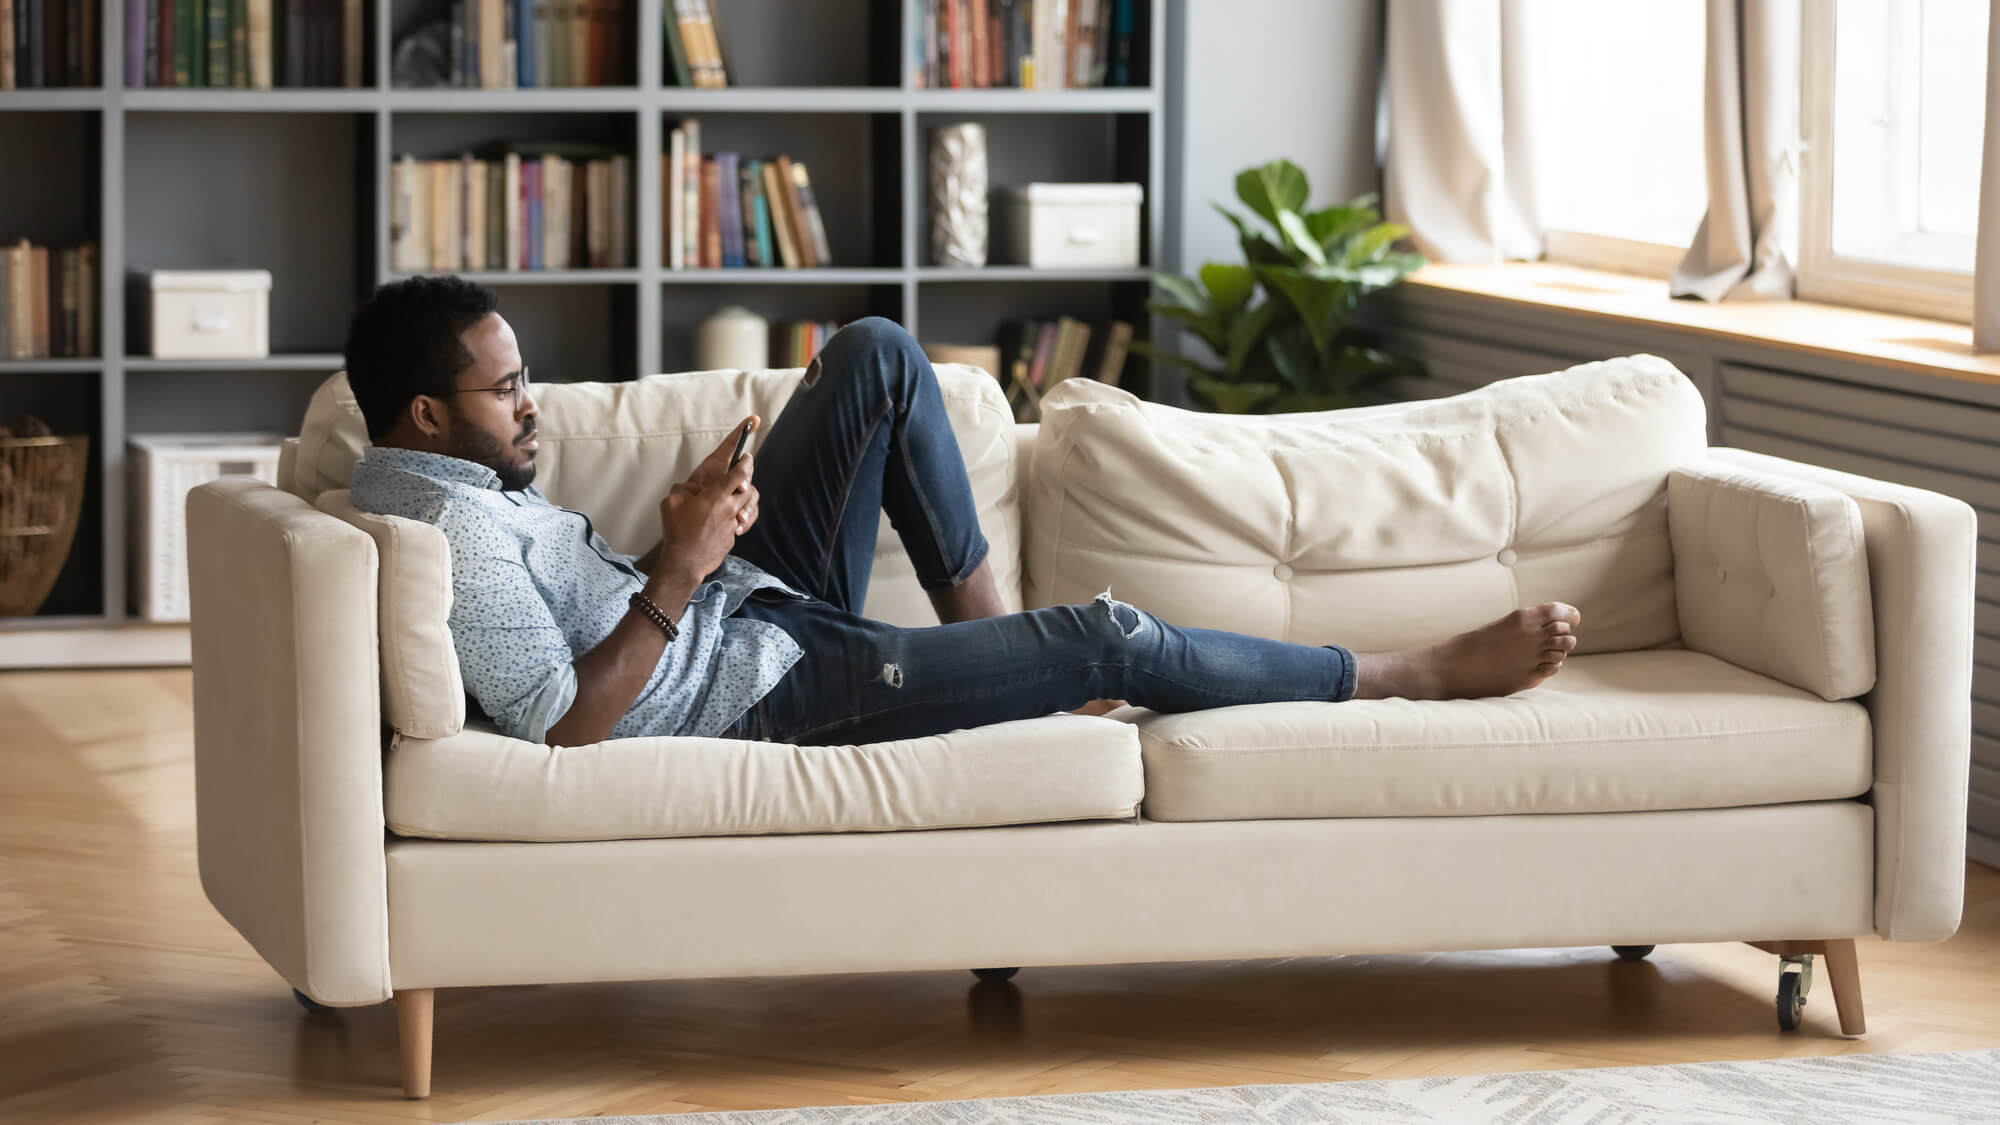 Black man sitting on couch